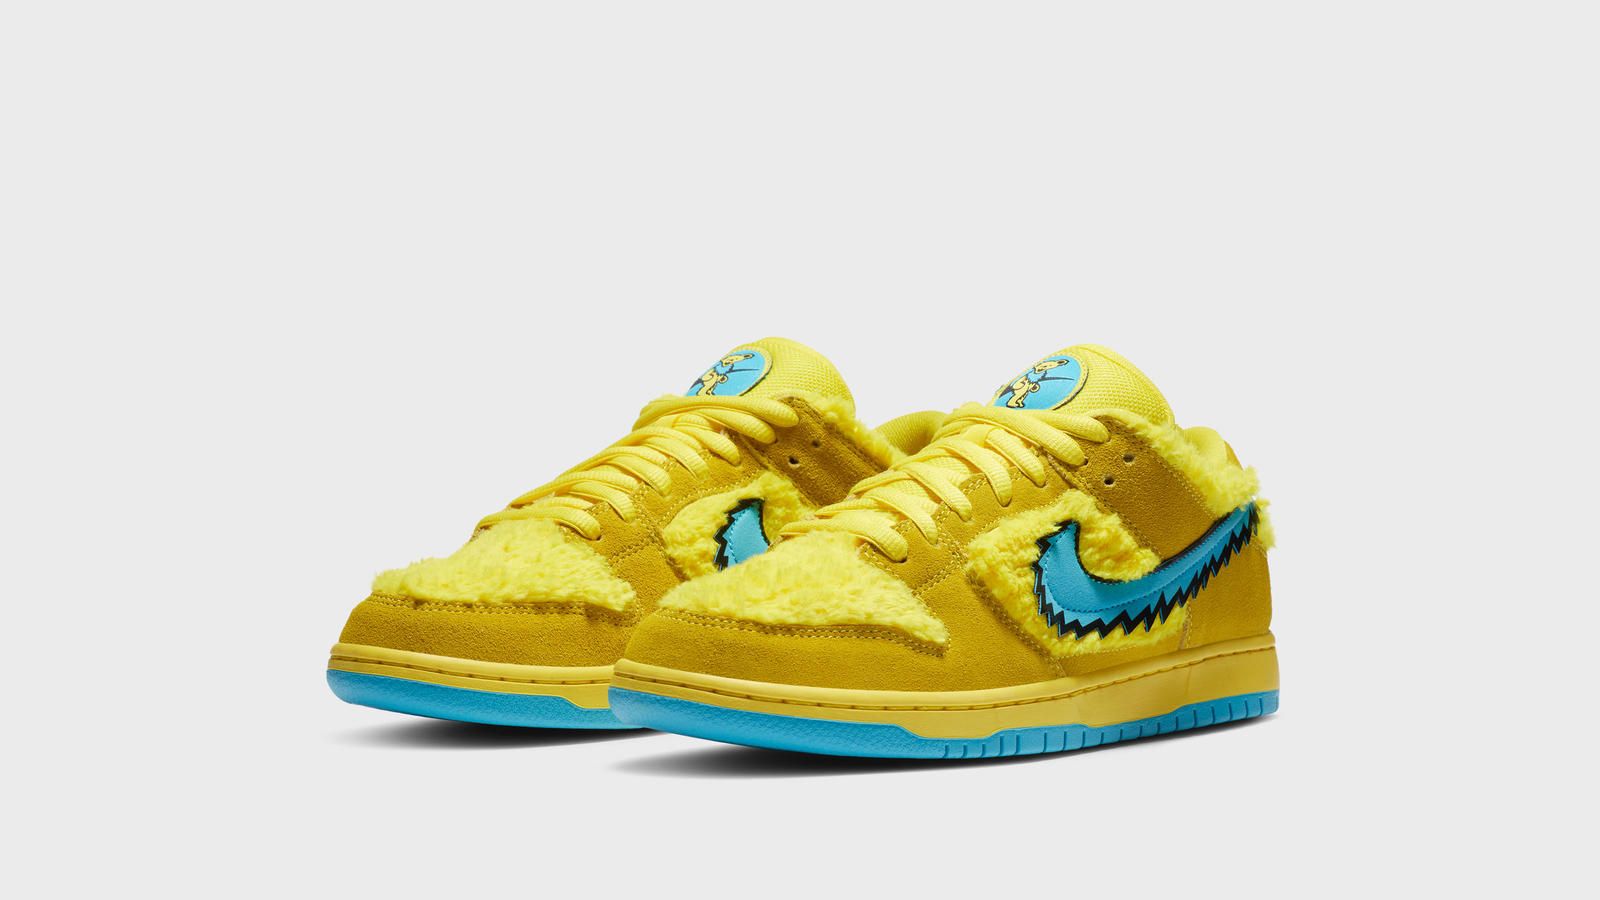 Nike SB Dunk Low Grateful Dead Official Image and Release Date